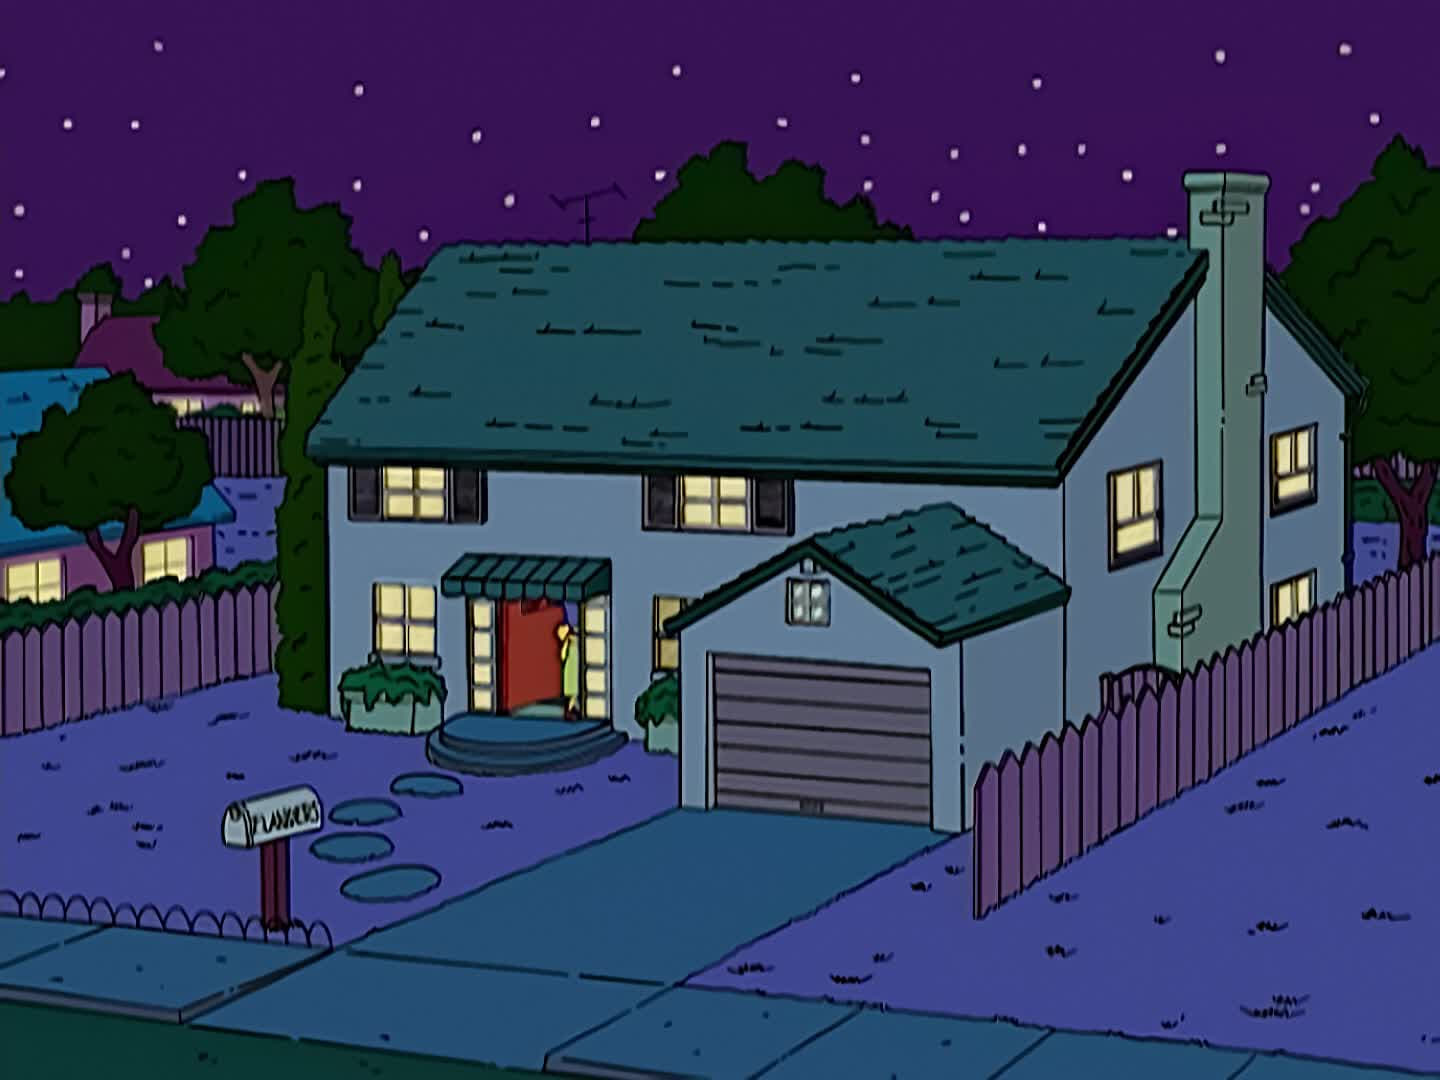 The Simpsons Season 17 :Episode 14  Bart Has Two Mommies